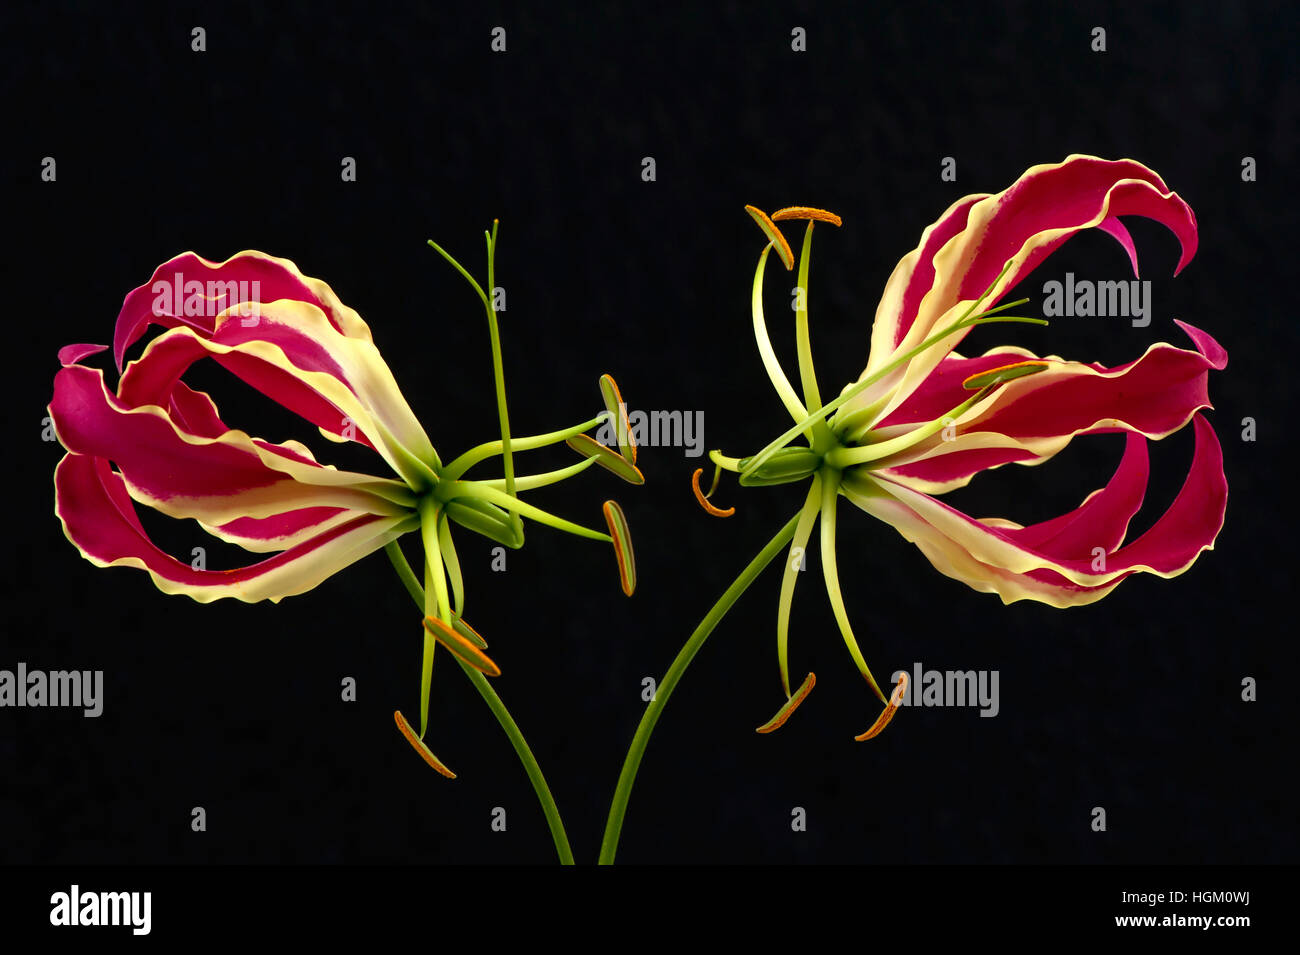 Gloriosa superba flowers, the lilies are also known as flame lily, glory lily, climbing lily, and creeping lily. Stock Photo